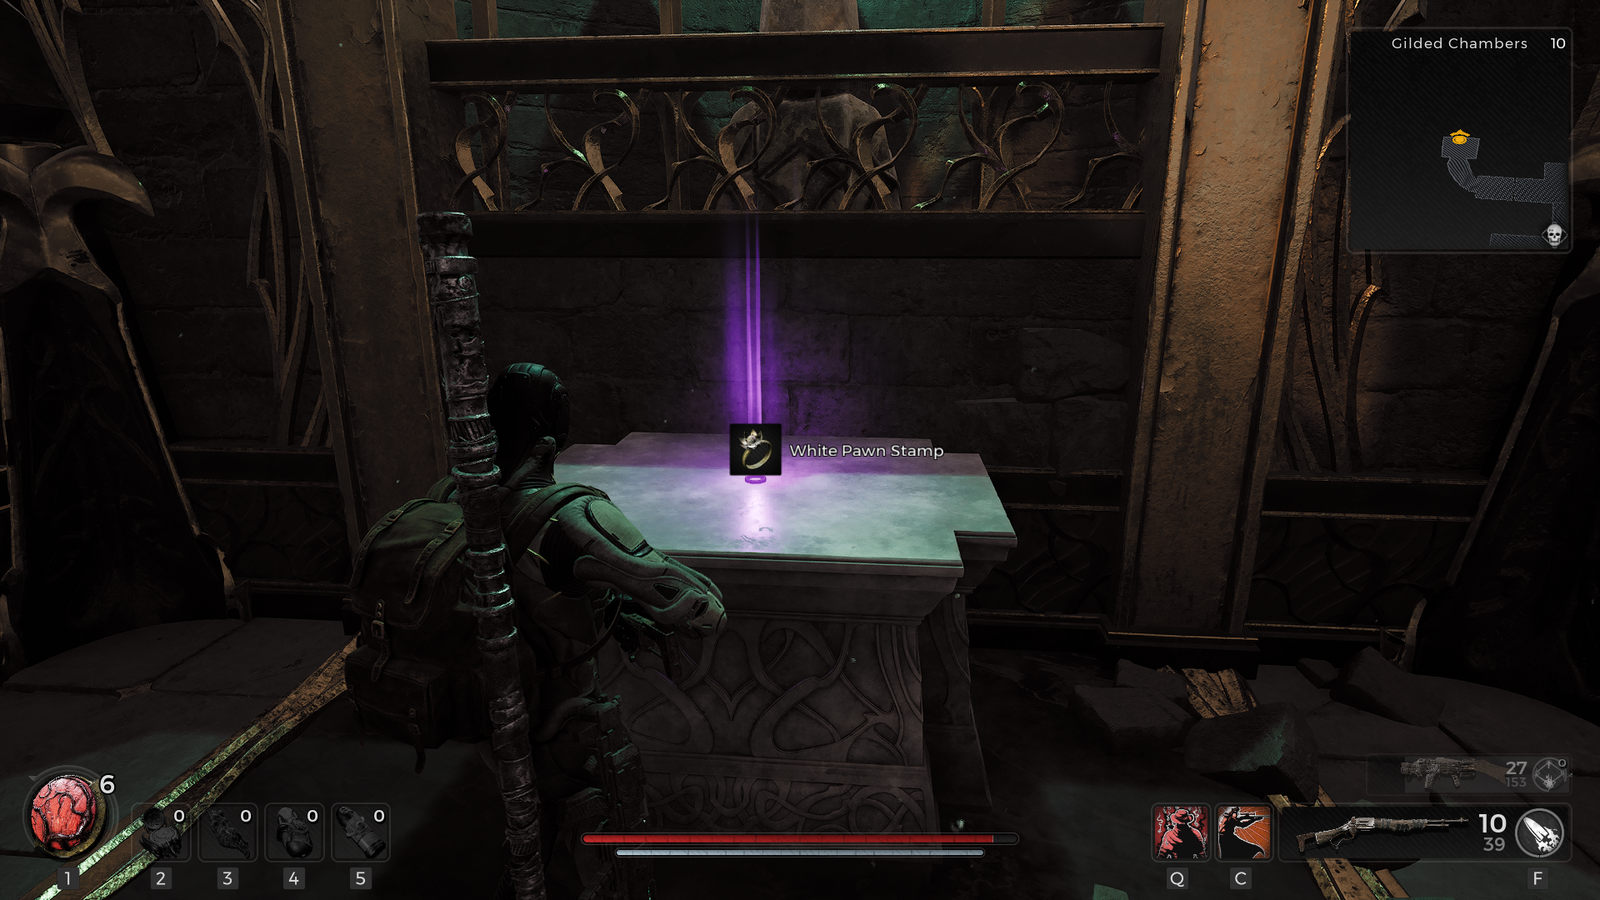 The white pawn stamp reward for Remnant 2 Gilded Chambers torch puzzle